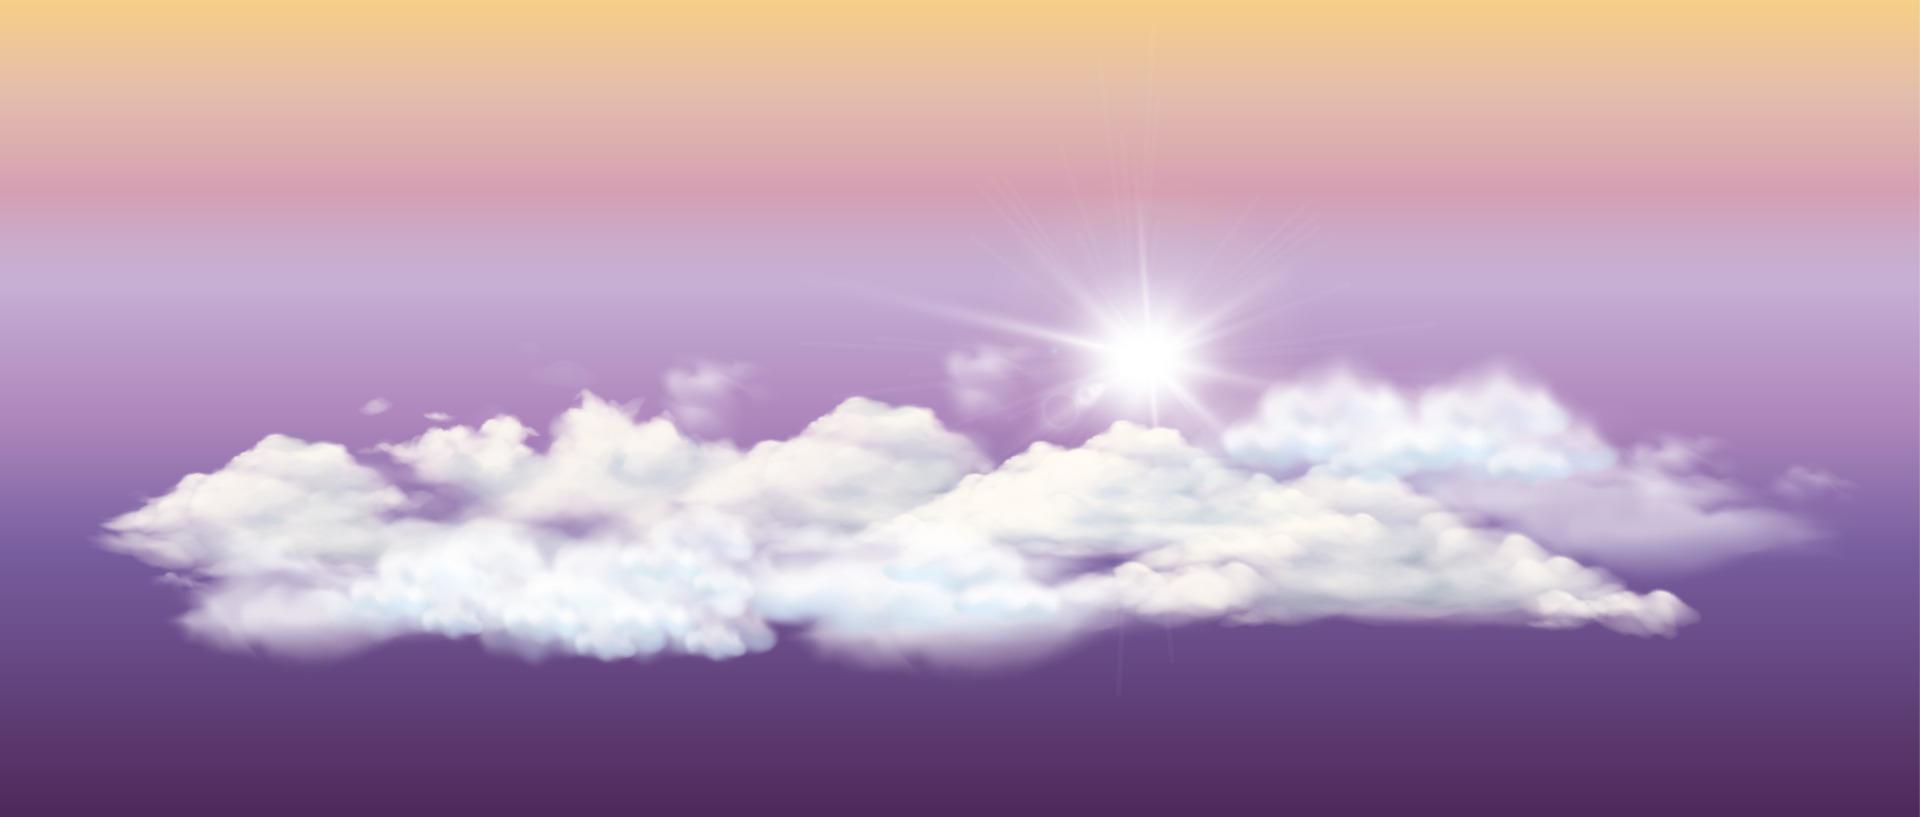 white clouds and sun, 3d illustration of natural scenery with attractive sky colors, editable vector